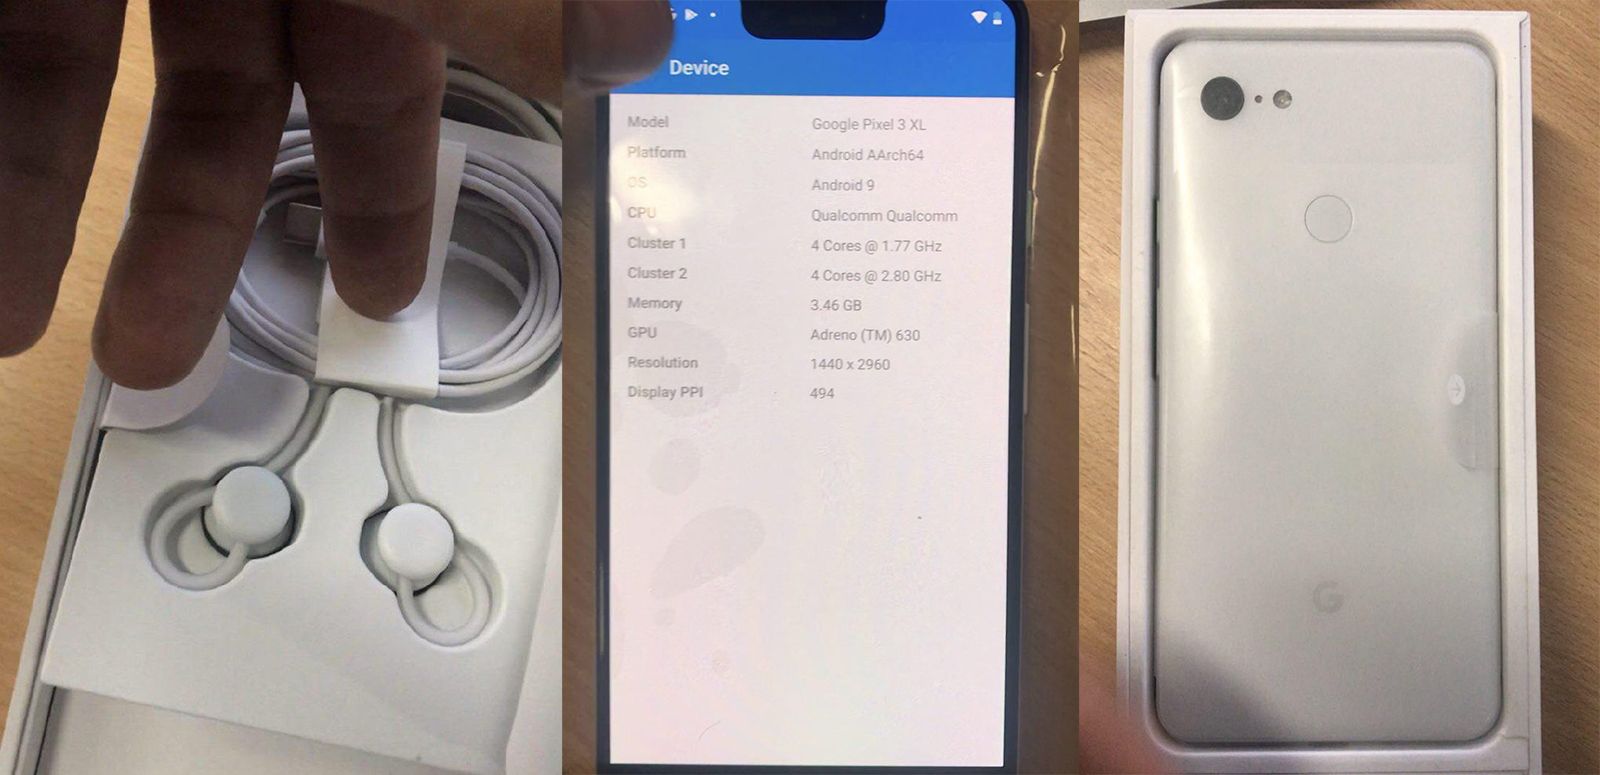 Google Pixel 3 Xl Fully Revealed In Hands-on Pics And Video image 6